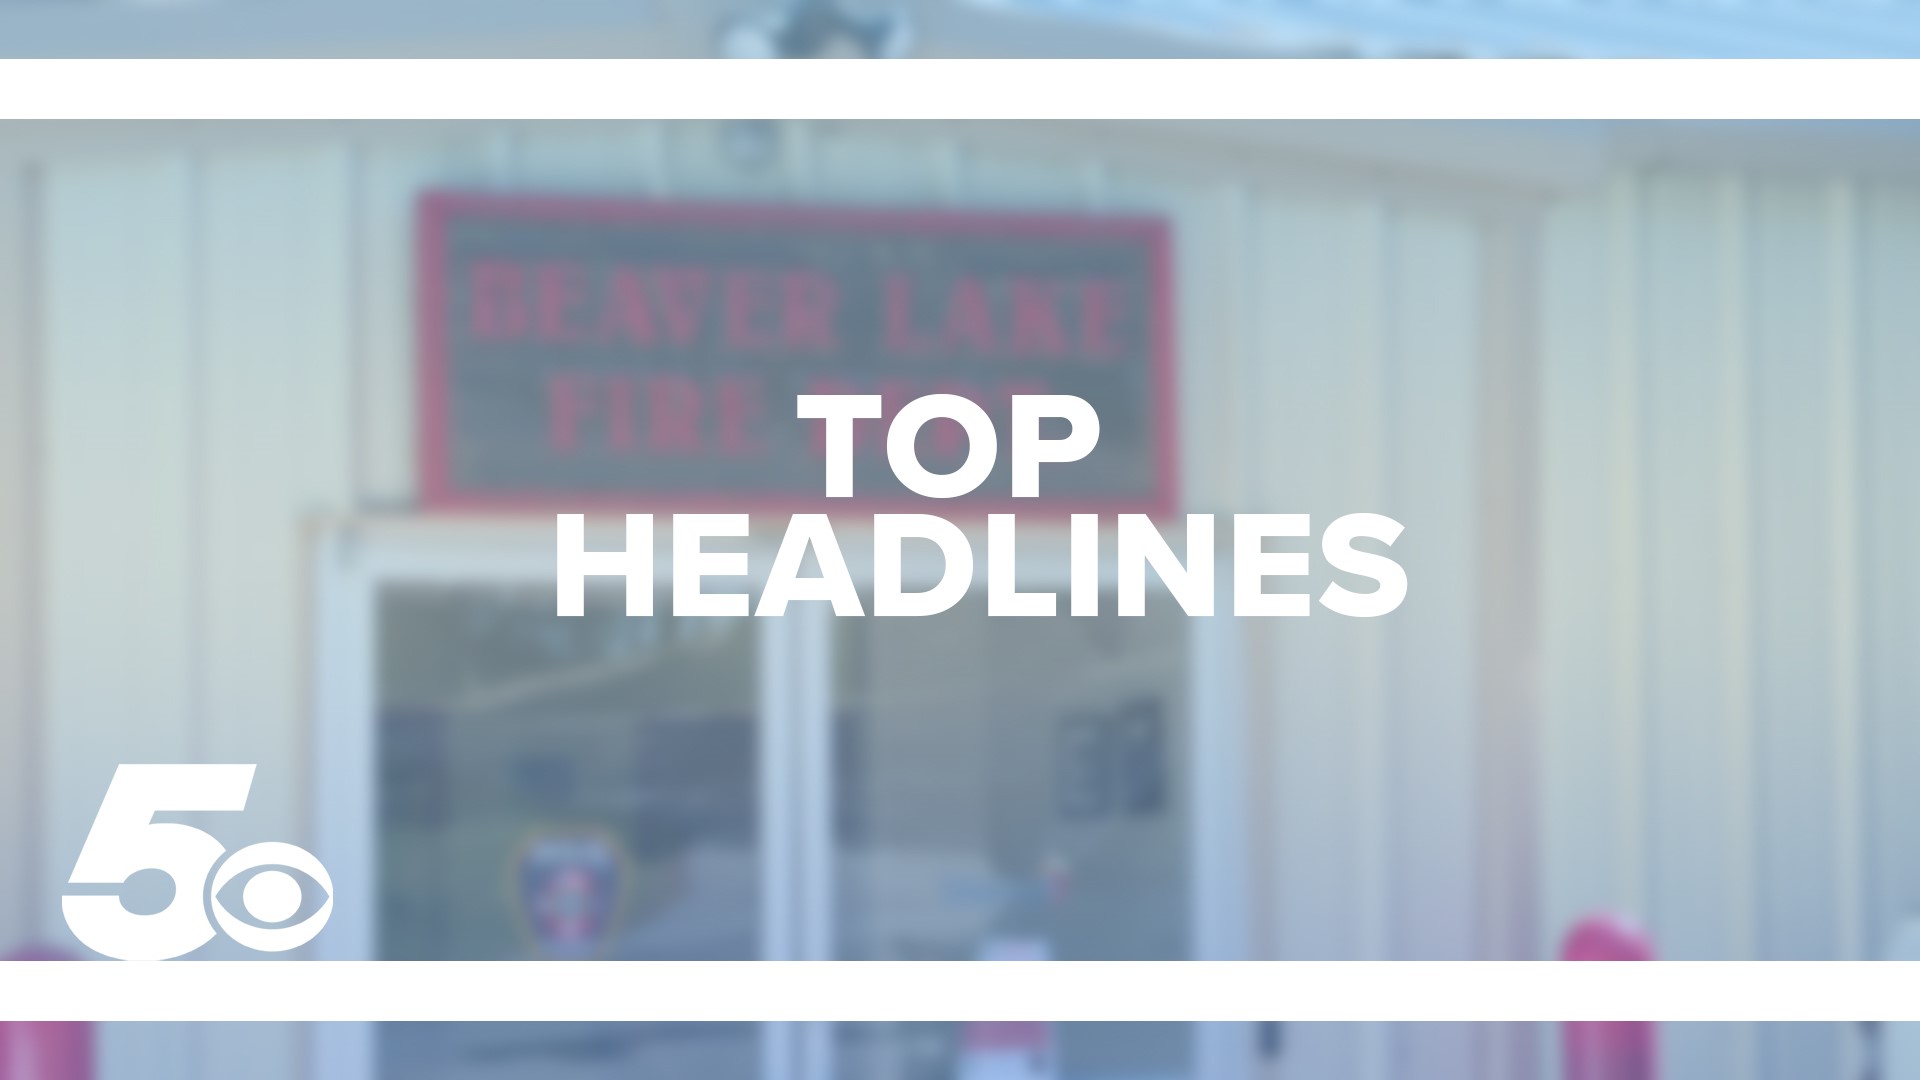 Take a look at today's top headlines for local news